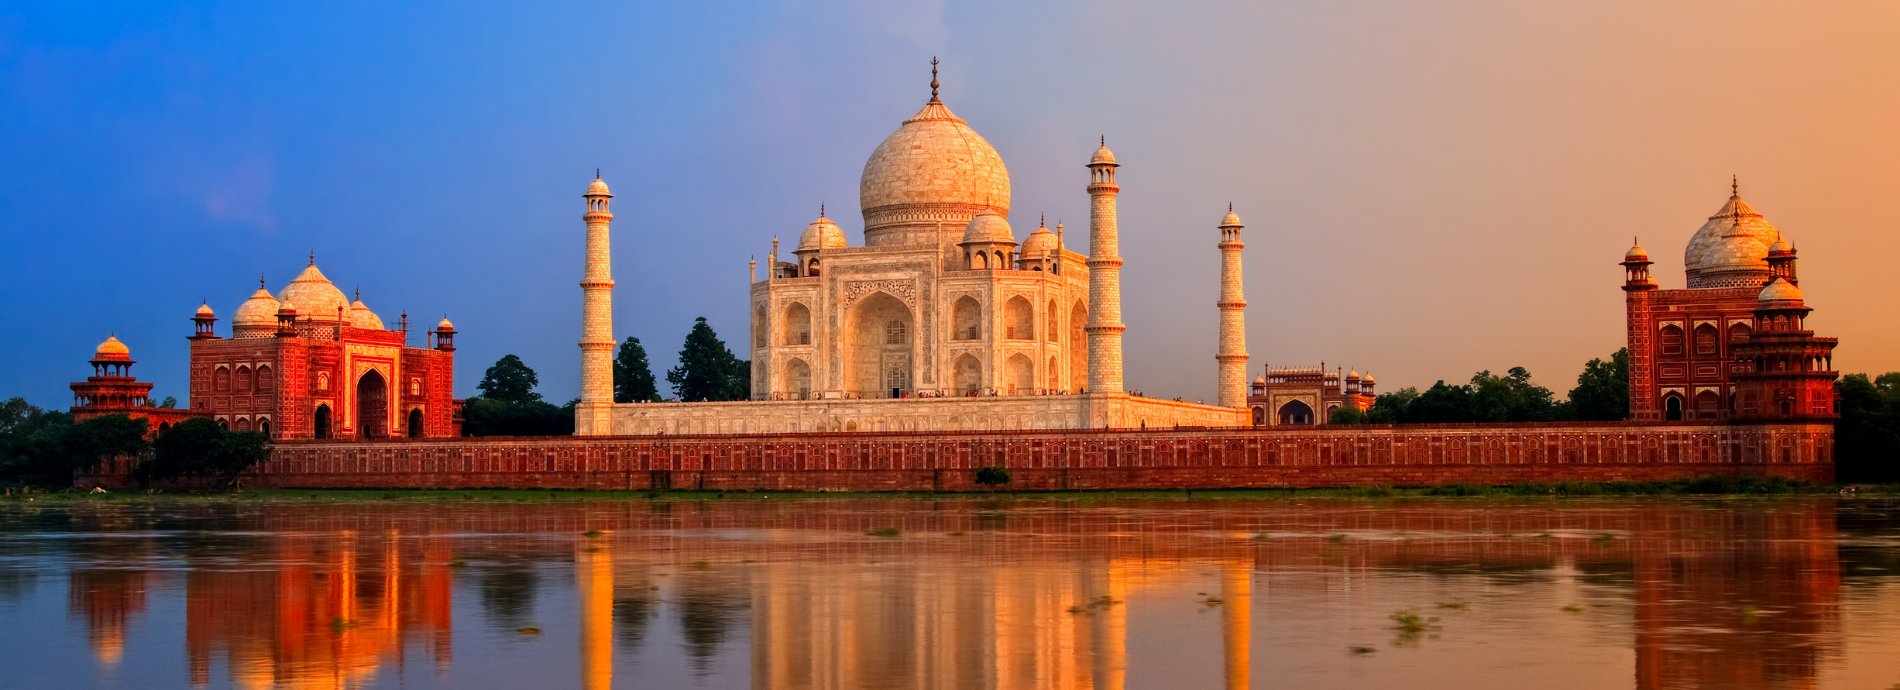 Most Instagrammable Places in India Banner